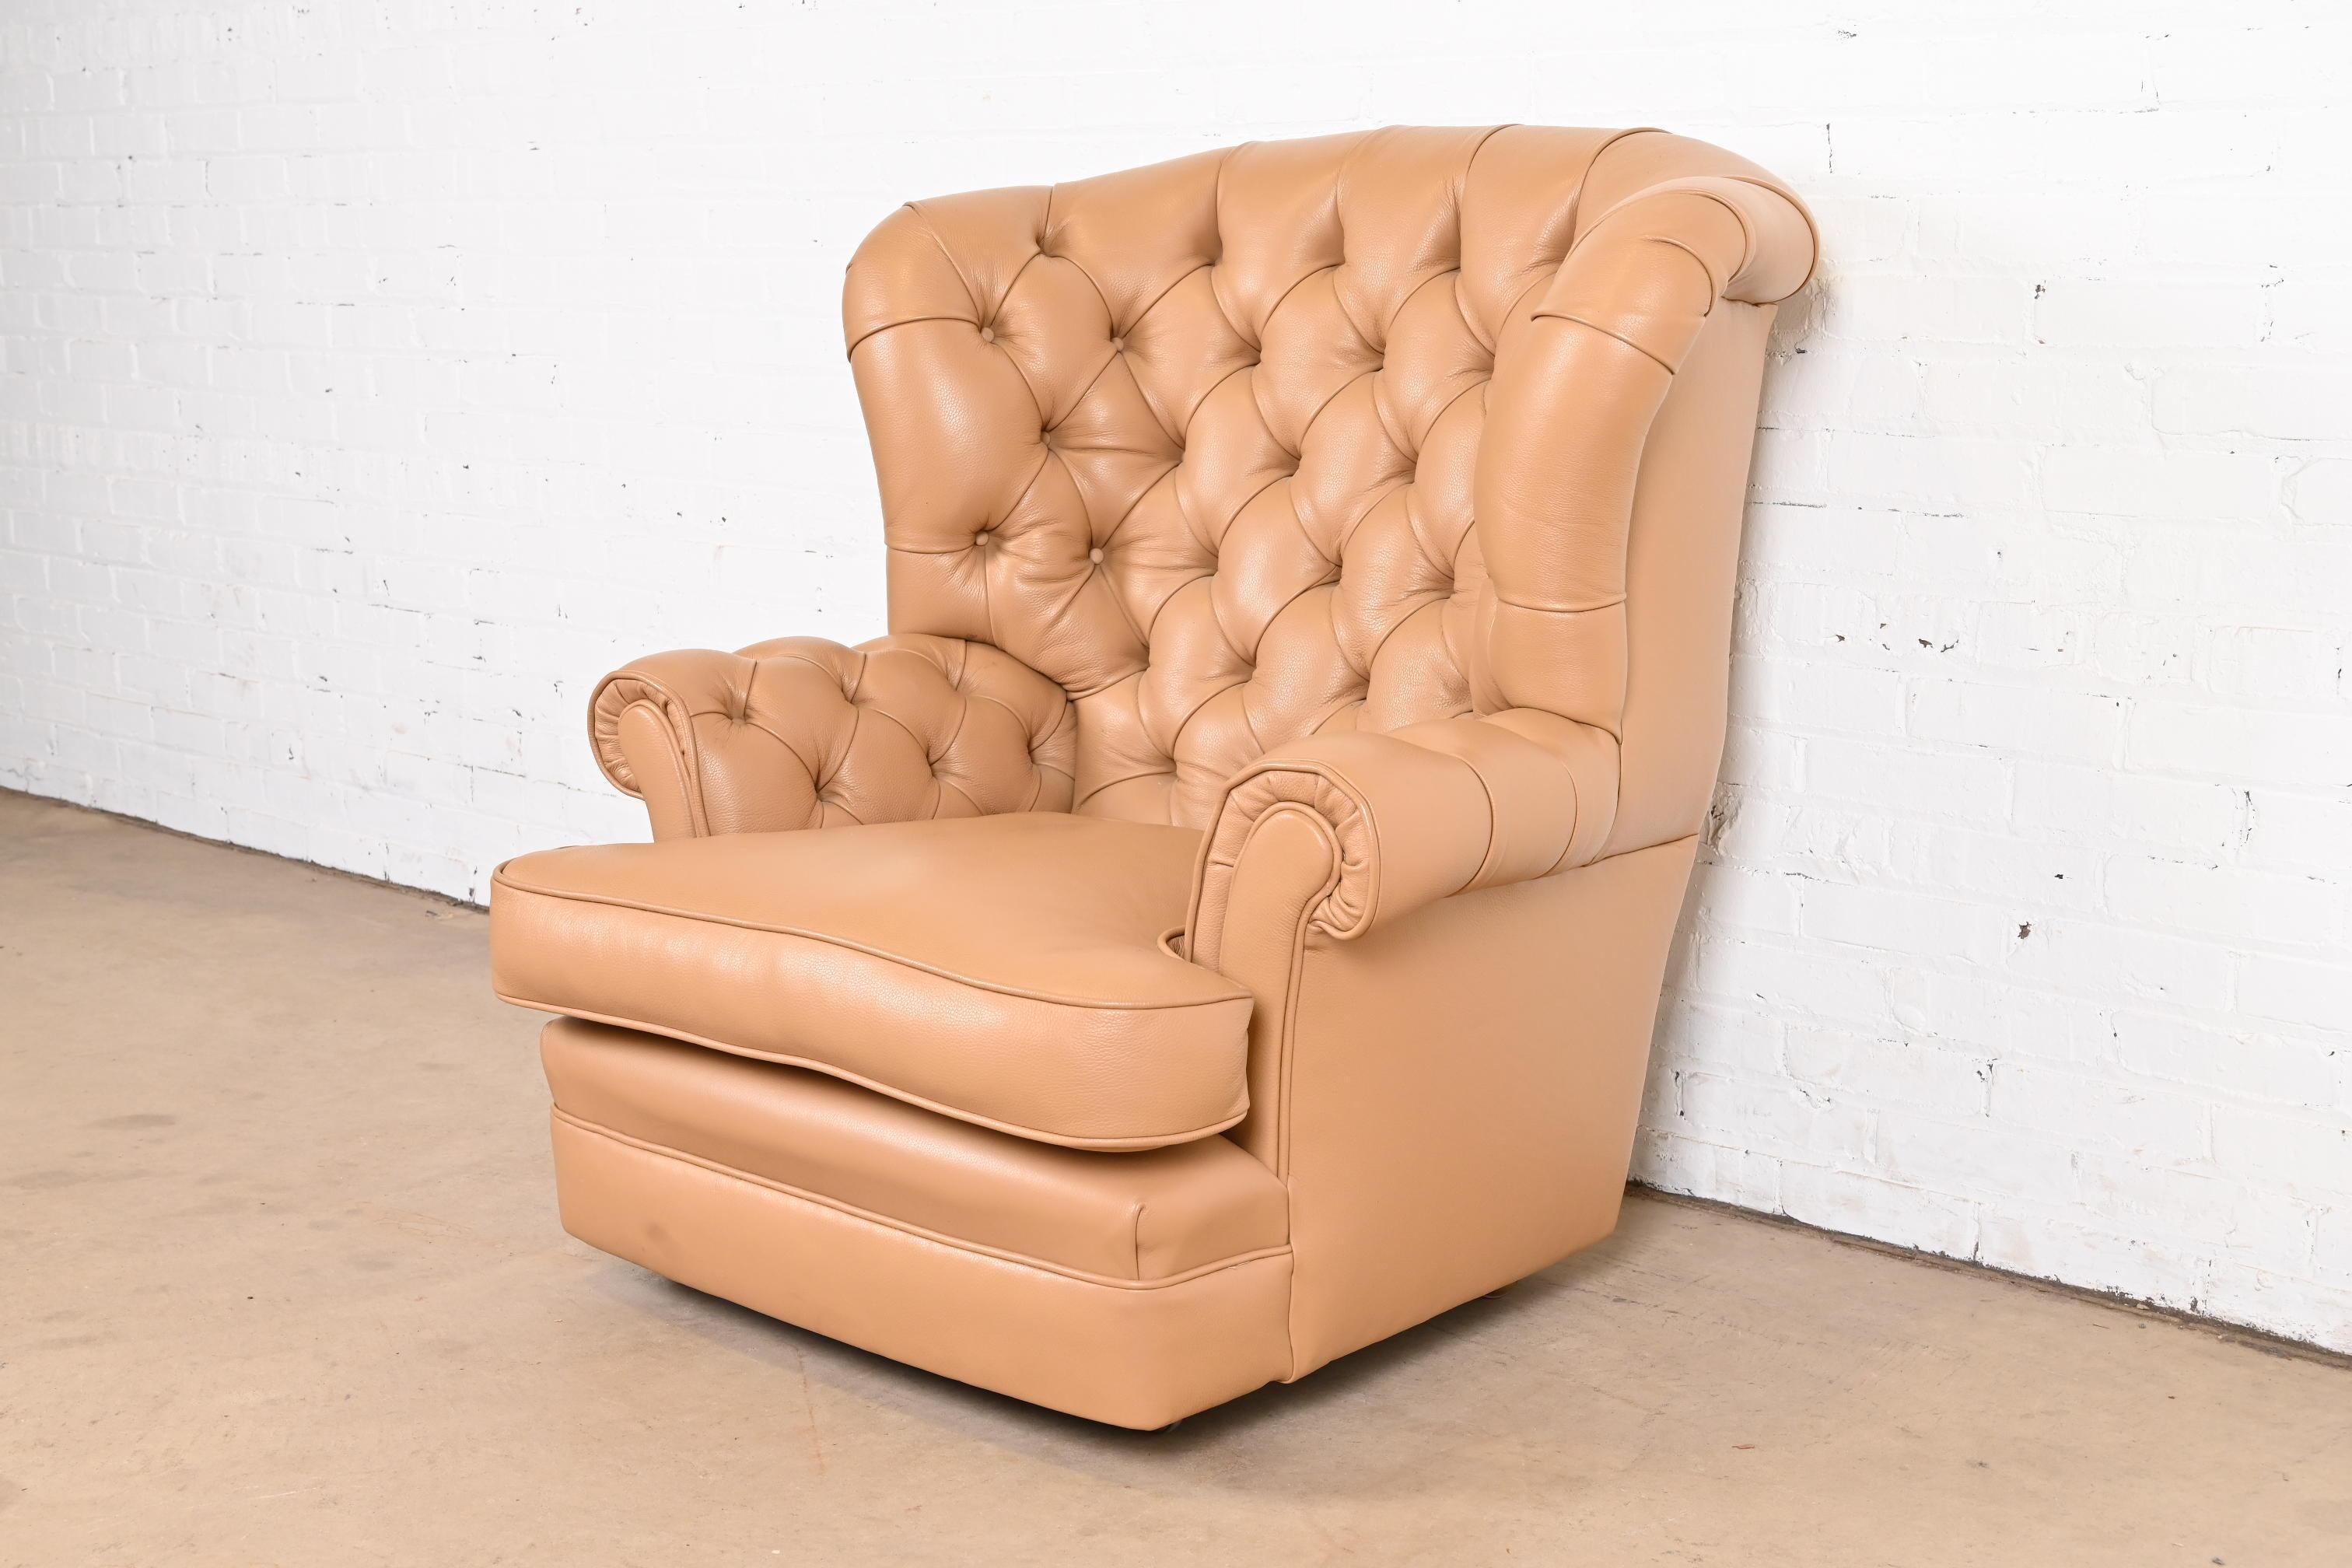 Vintage Tufted Leather Chesterfield Wingback Lounge Chair In Good Condition For Sale In South Bend, IN